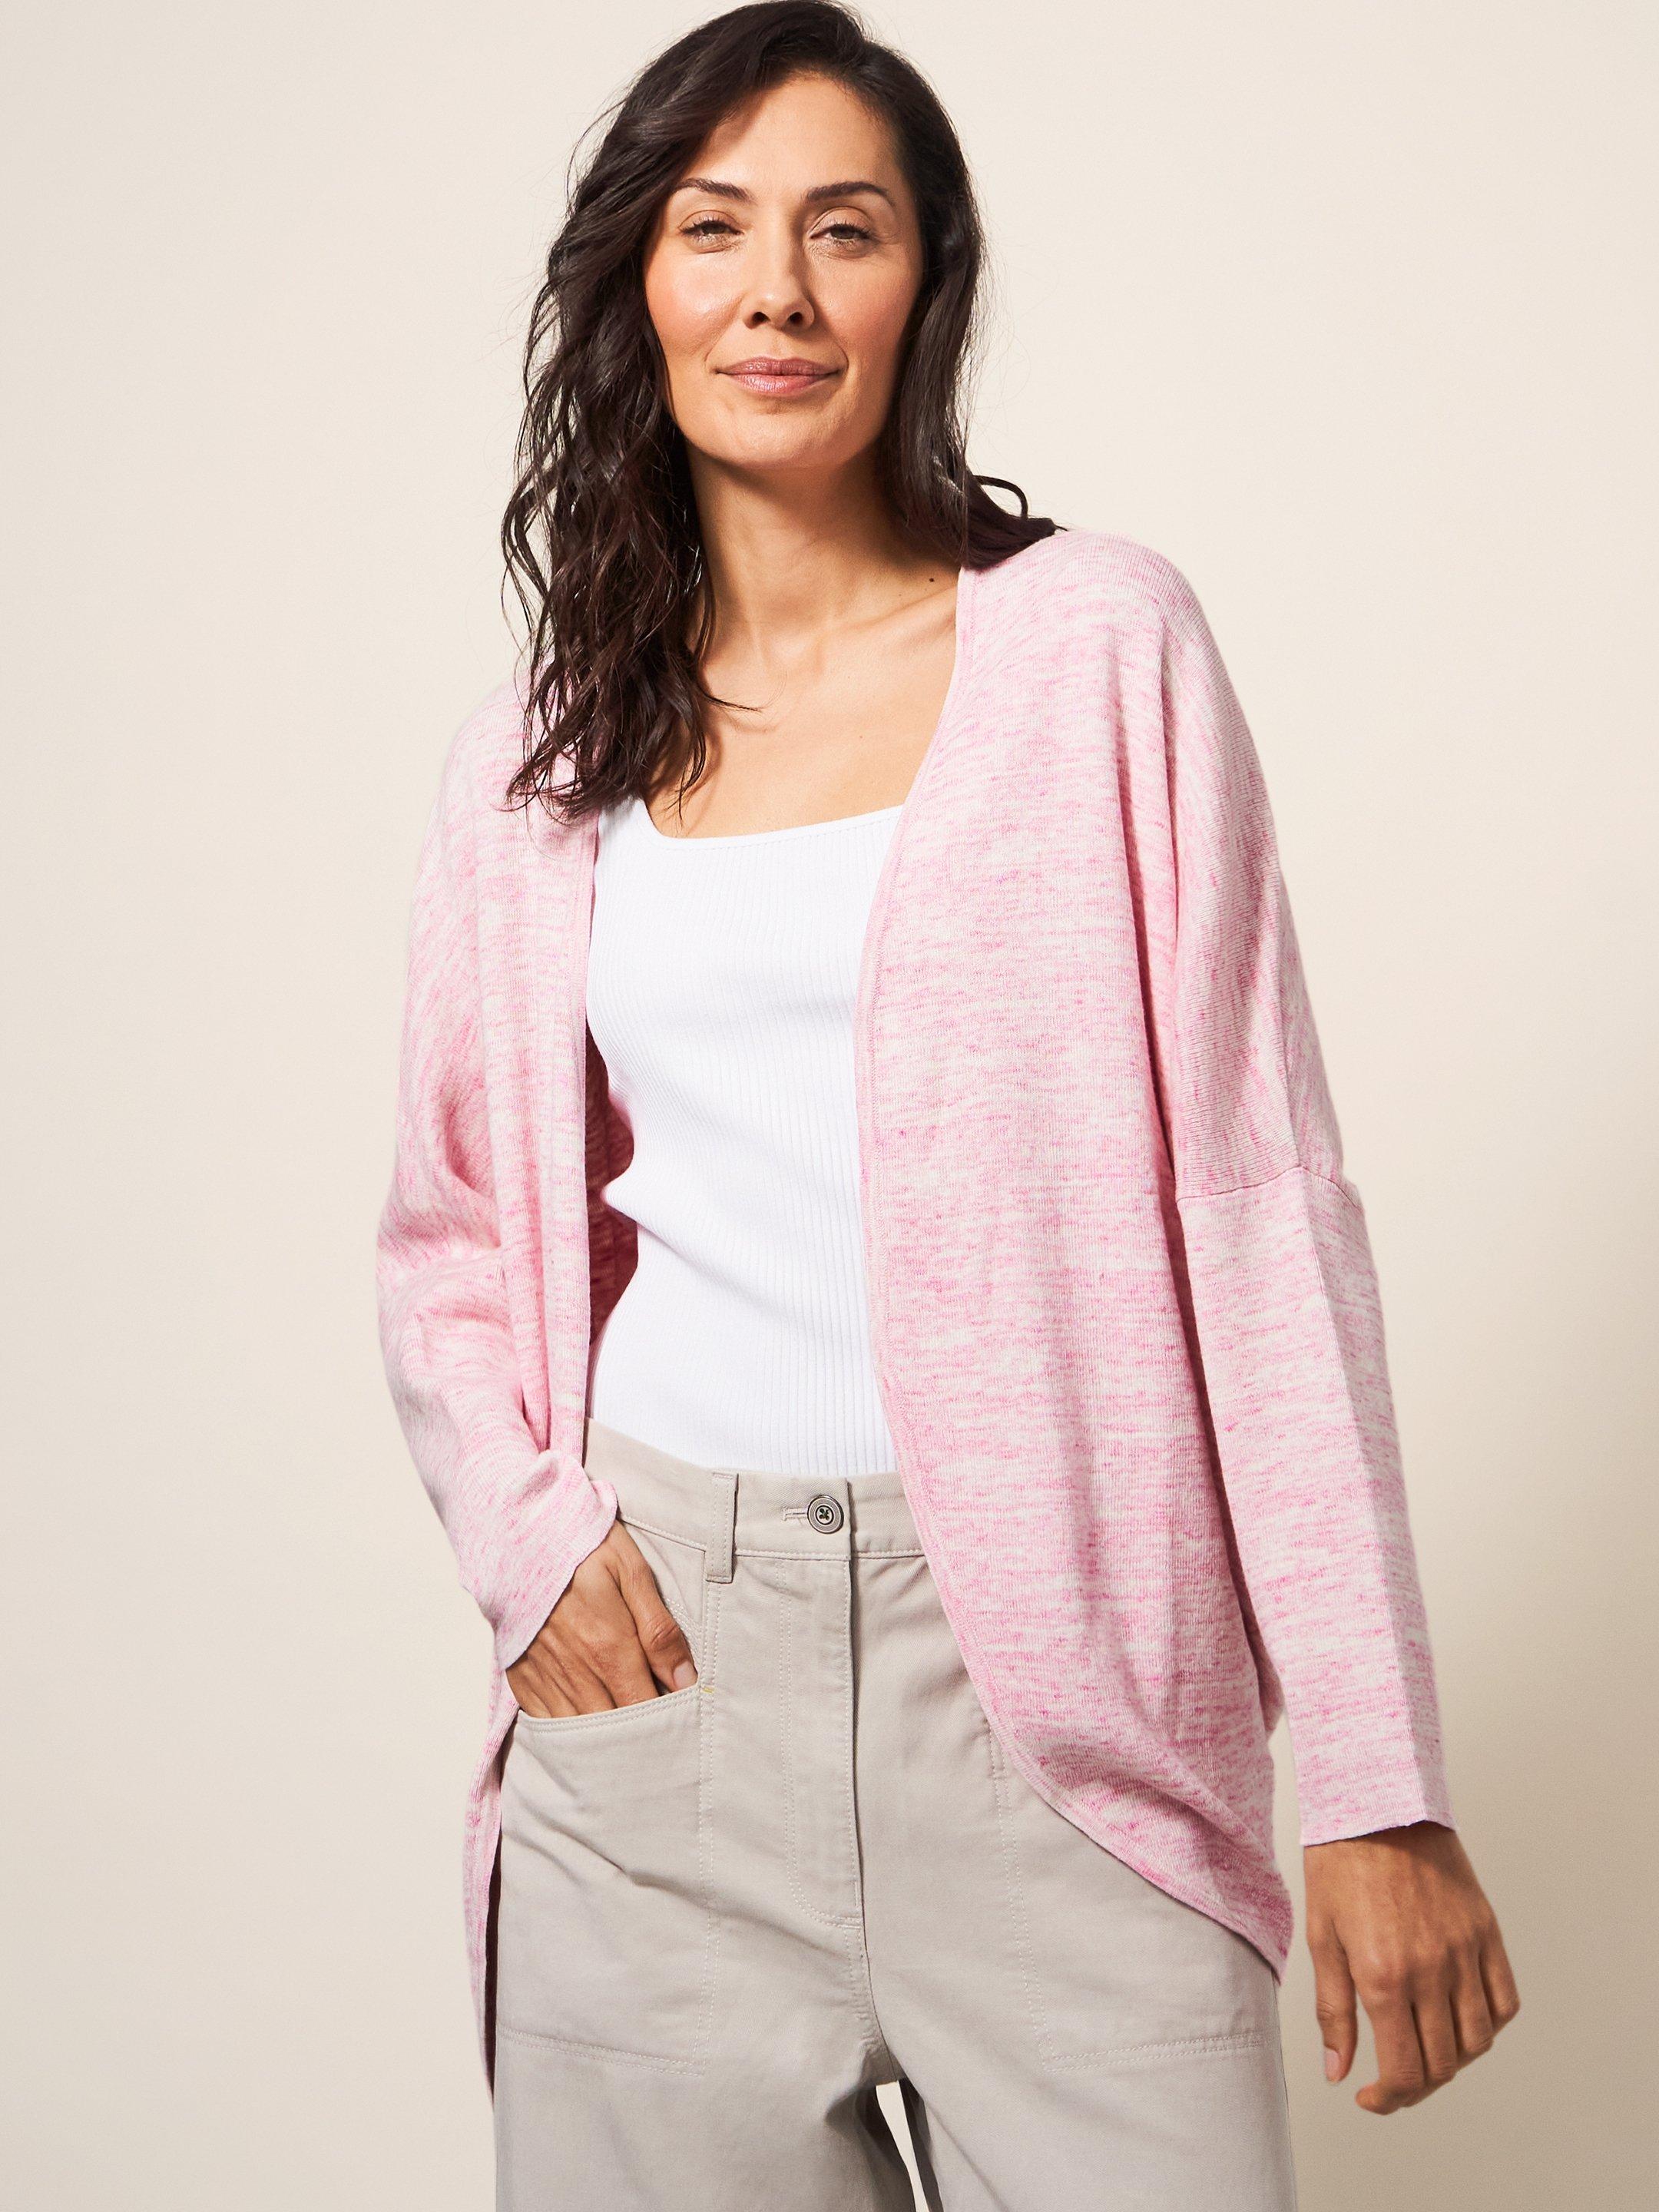 Cocoon Cardigan in MID PINK - LIFESTYLE